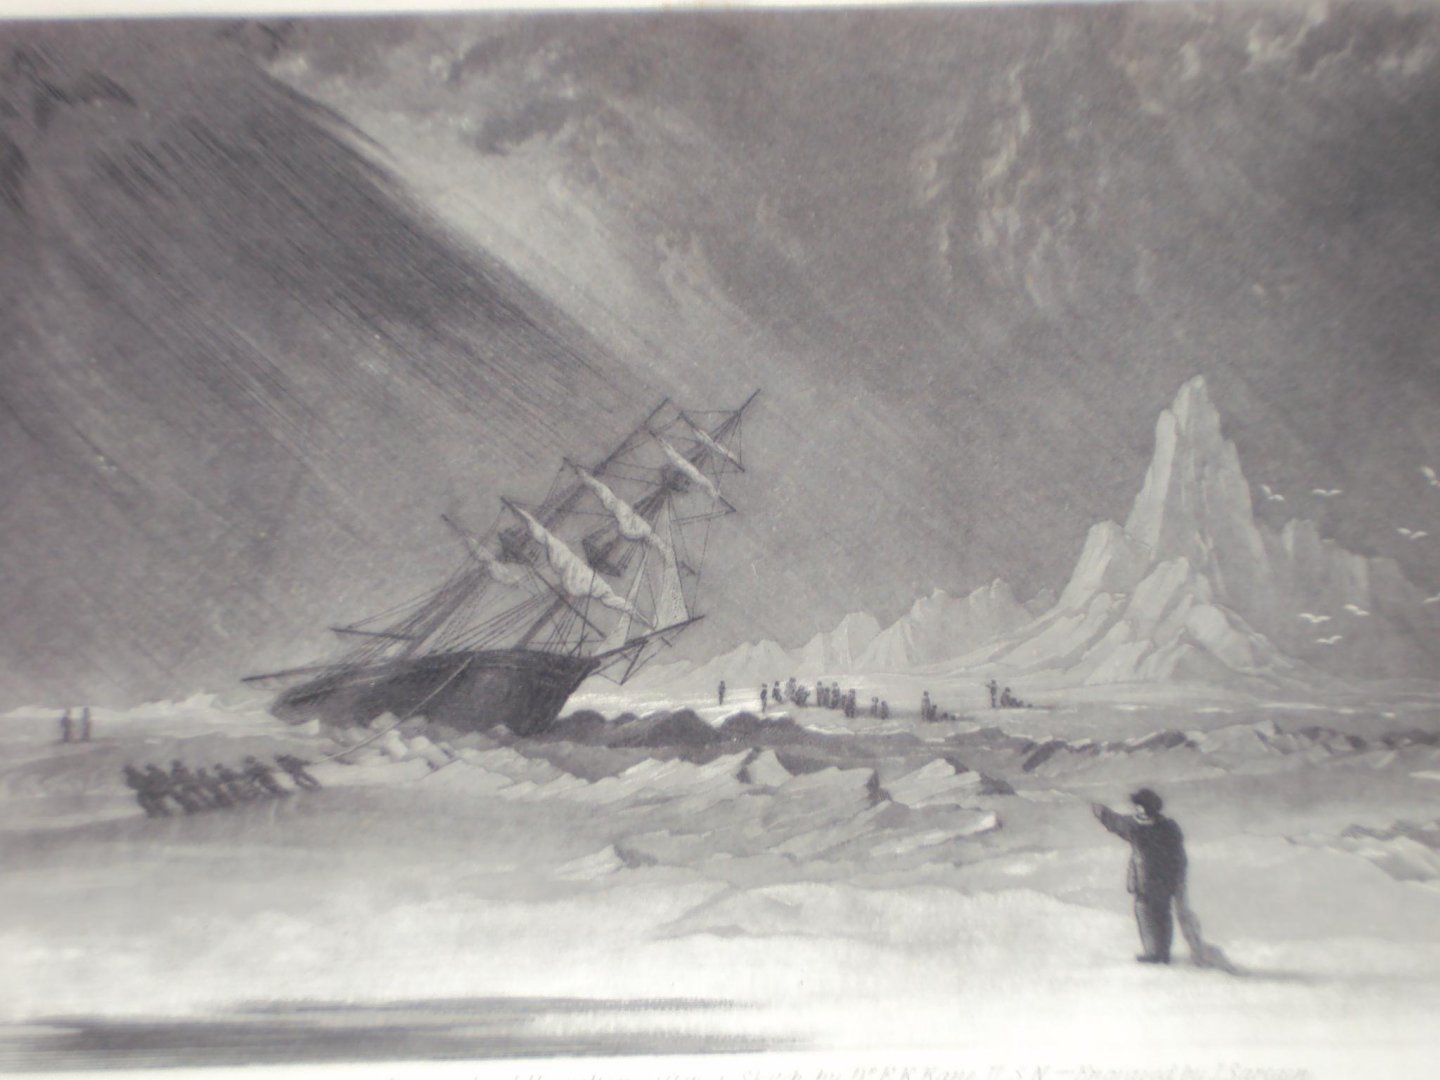 Elisha Kent Kane - The U.S. Grinnell expedition in search of sir John Franklin